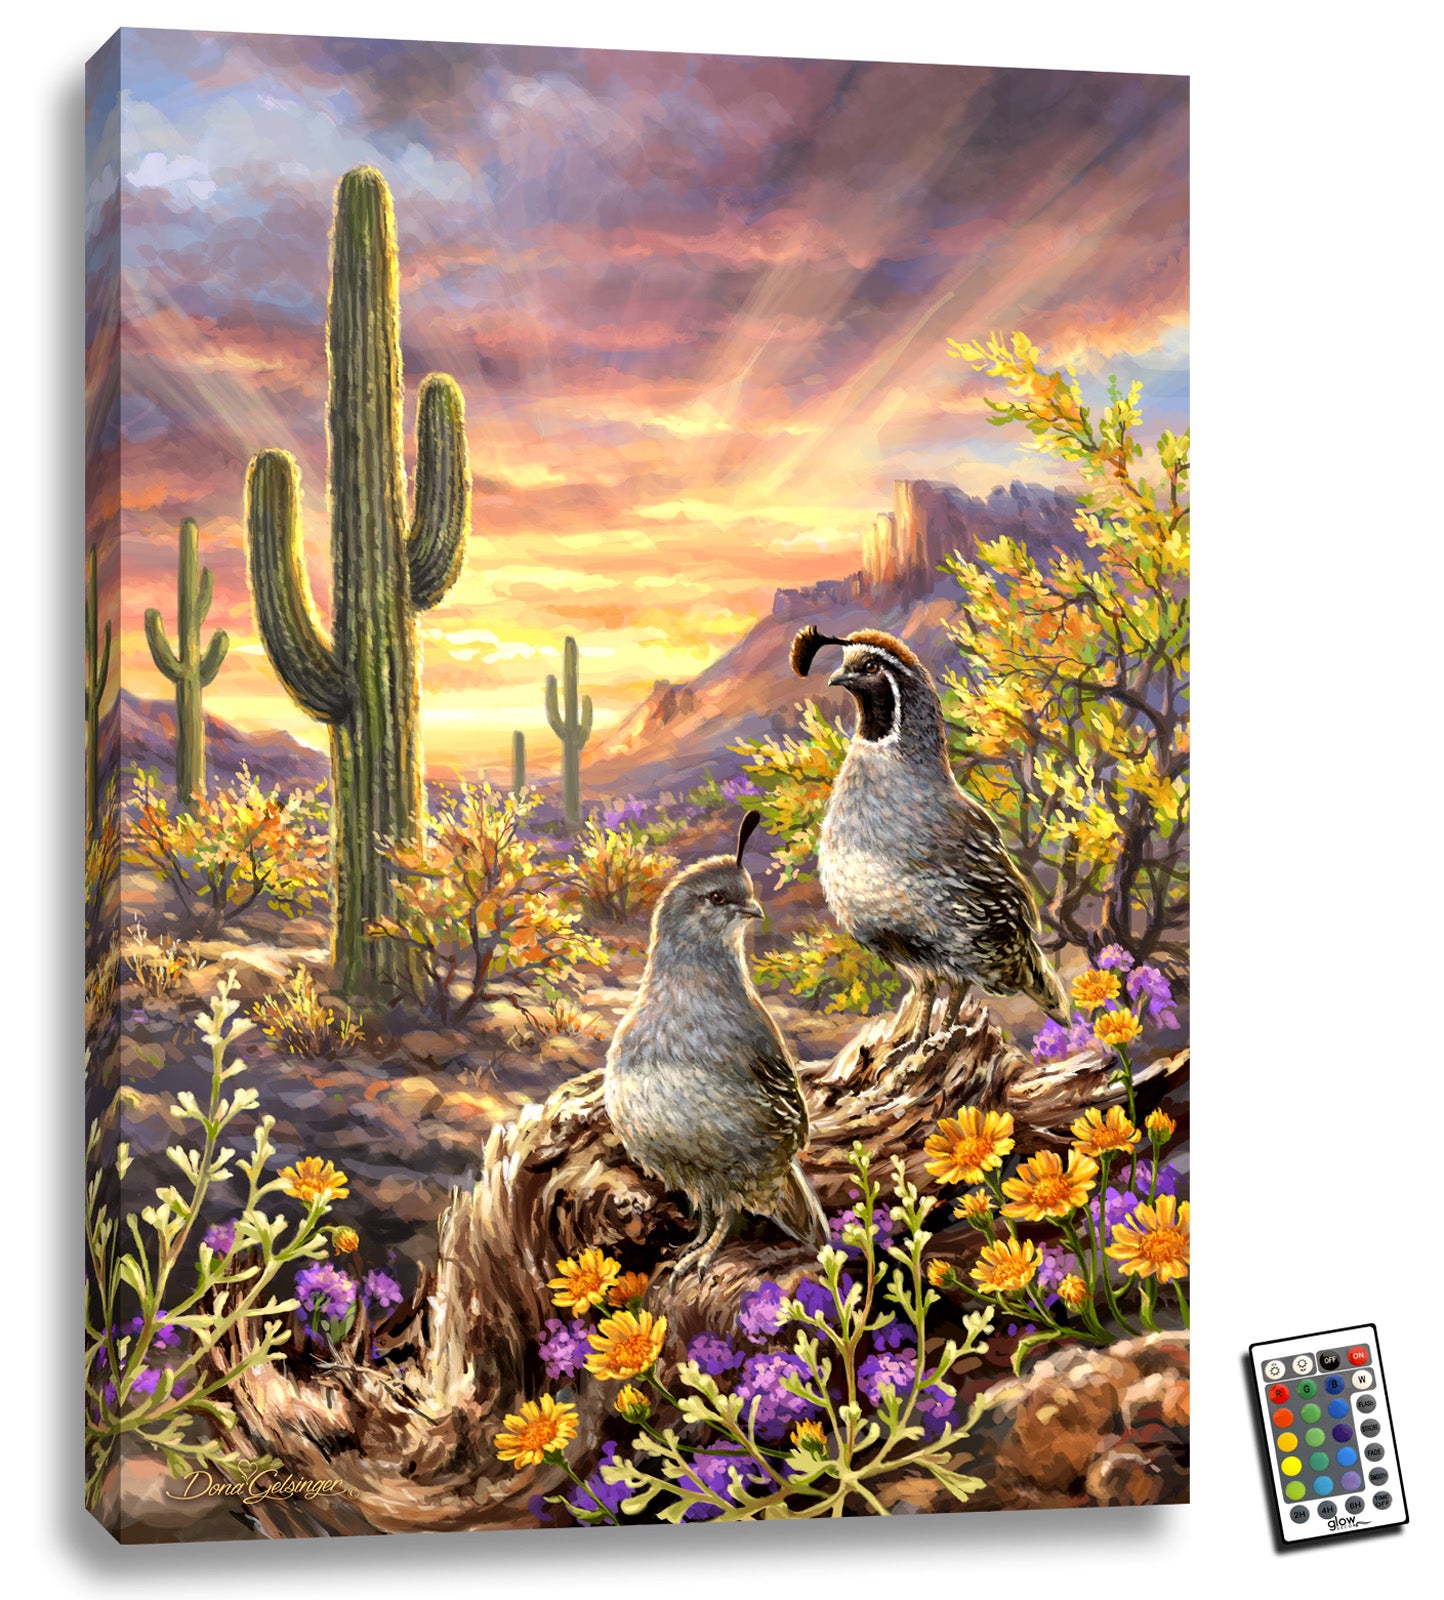 Two quails, the epitome of romance and devotion, stand proudly amidst a stunning array of vibrant purple and yellow flowers, surrounded by a desert scene full of towering cacti and delicate desert blooms. In the distance, a majestic plateau stands tall, adding to the natural beauty of this awe-inspiring piece.